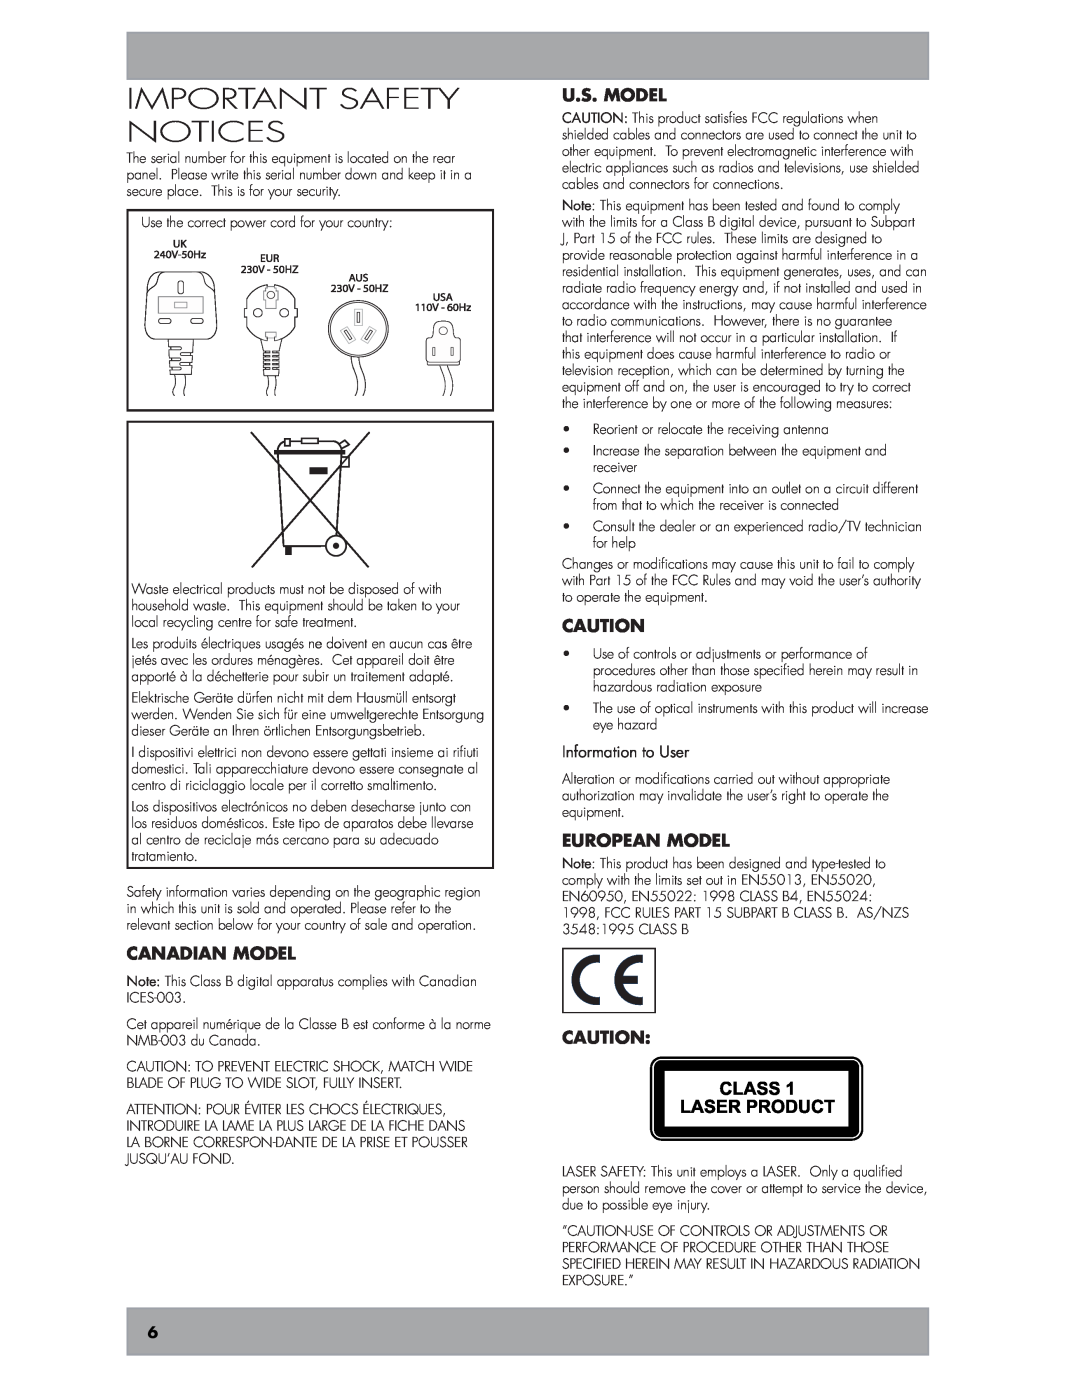 Niles Audio DMS4 manual Important Safety Notices, Canadian model, U.S. Model, European model, Information to User 